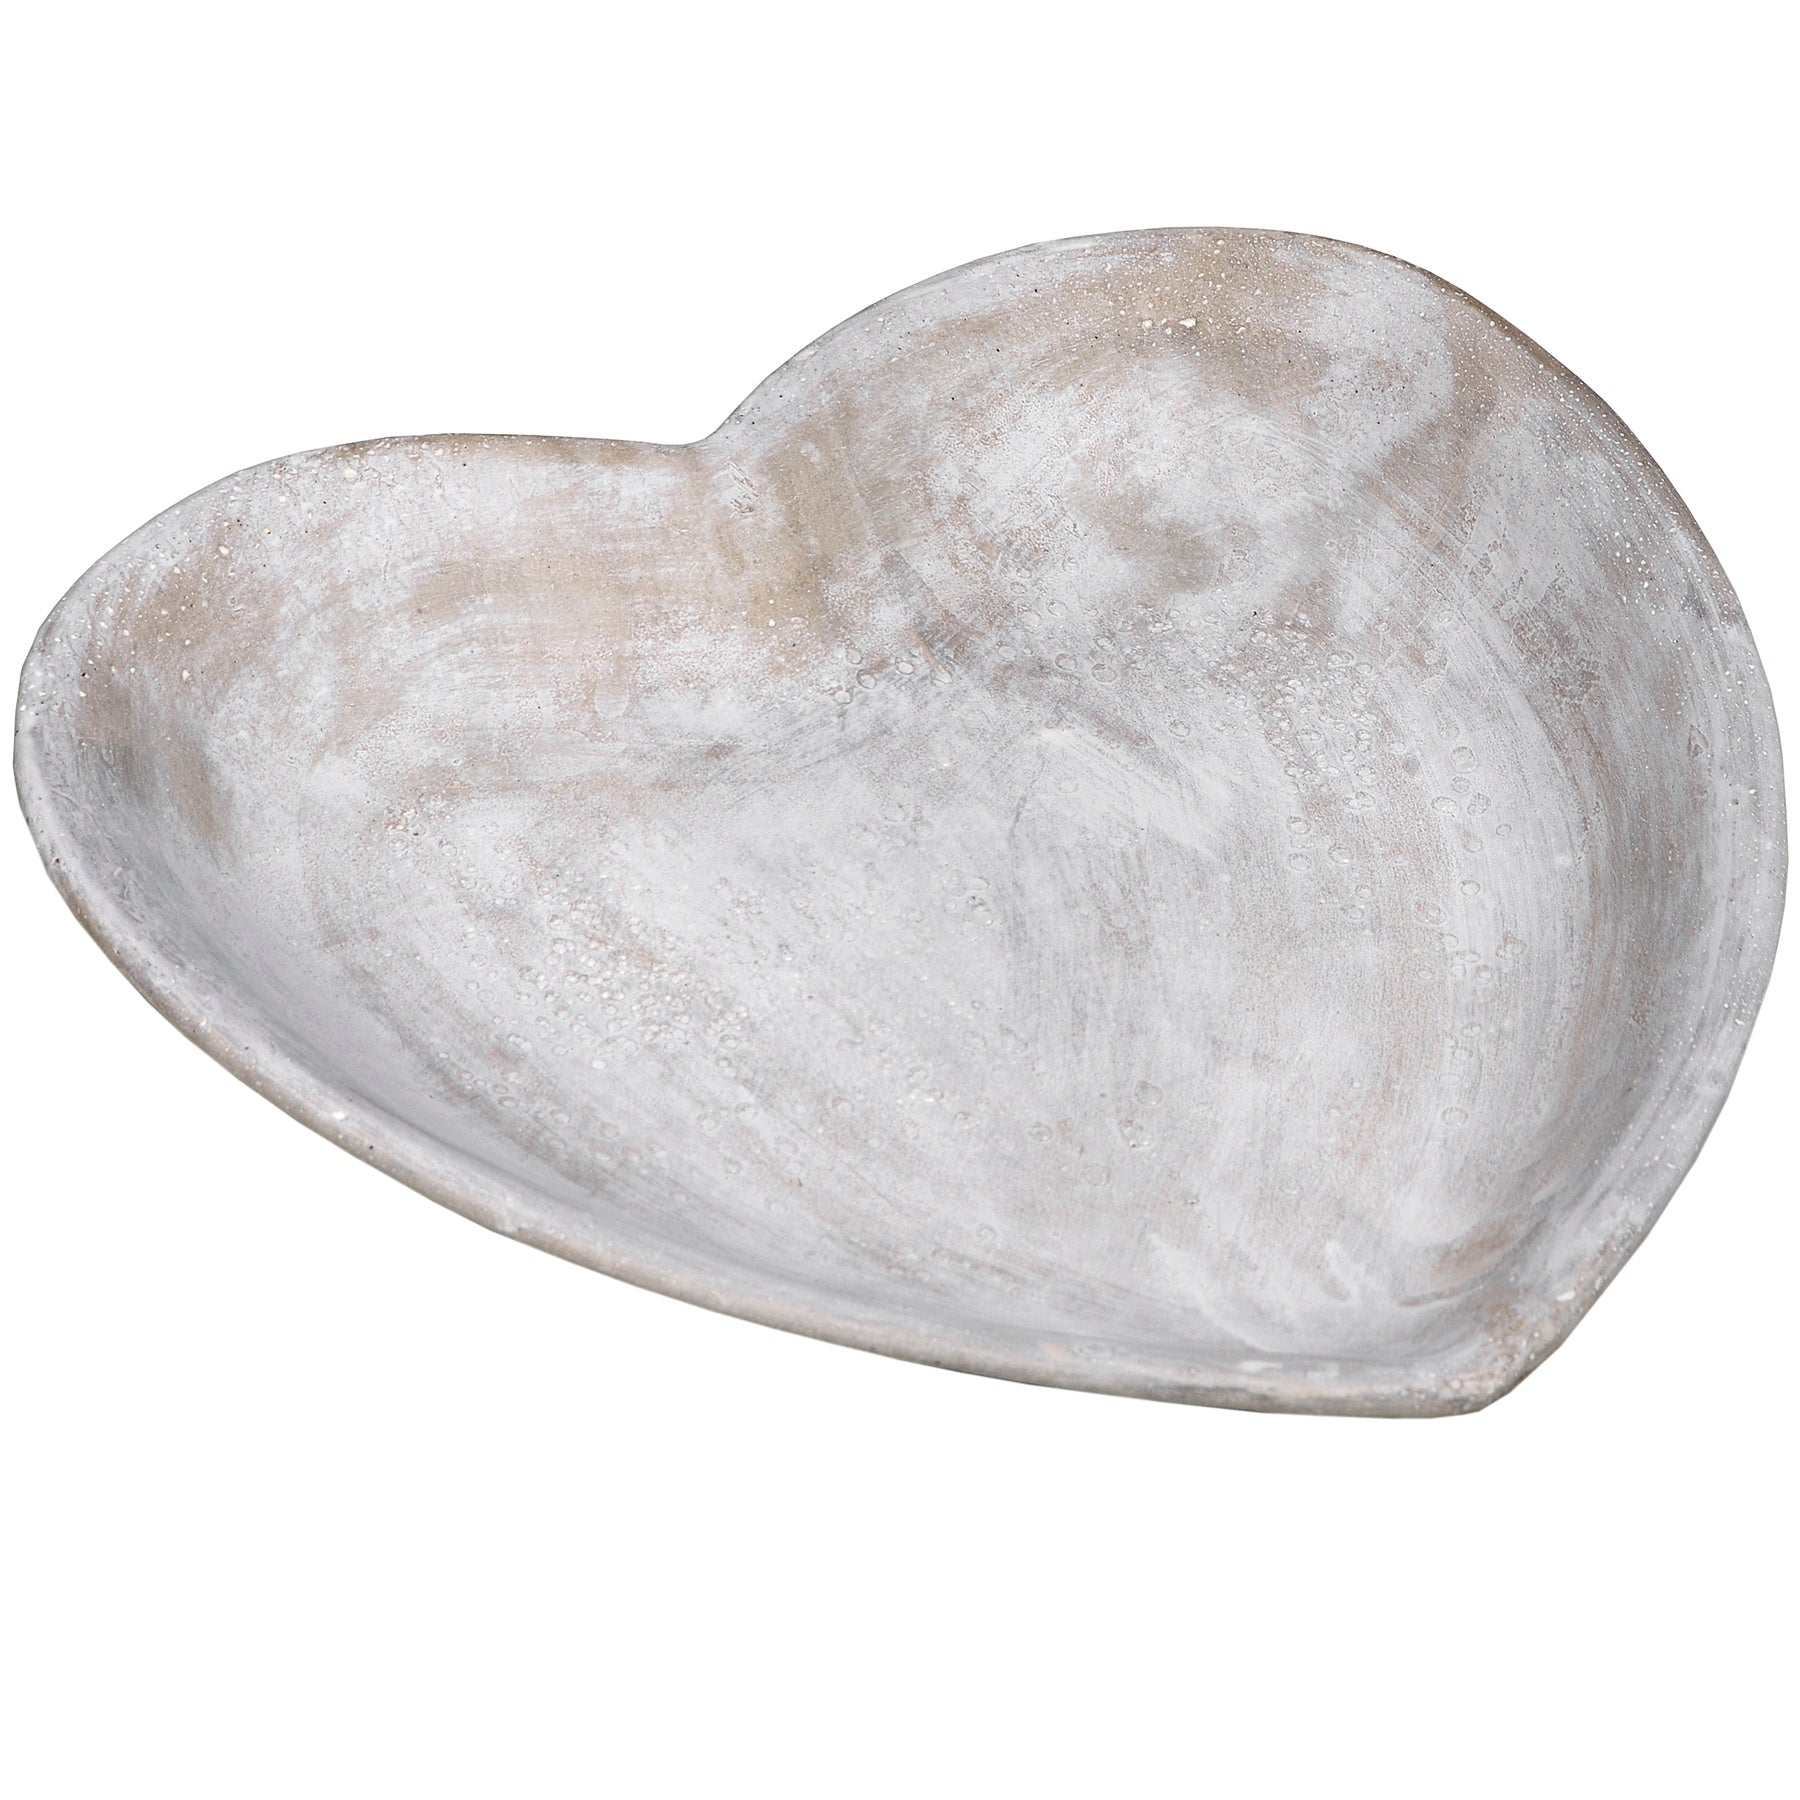 View Stone Heart Dish information